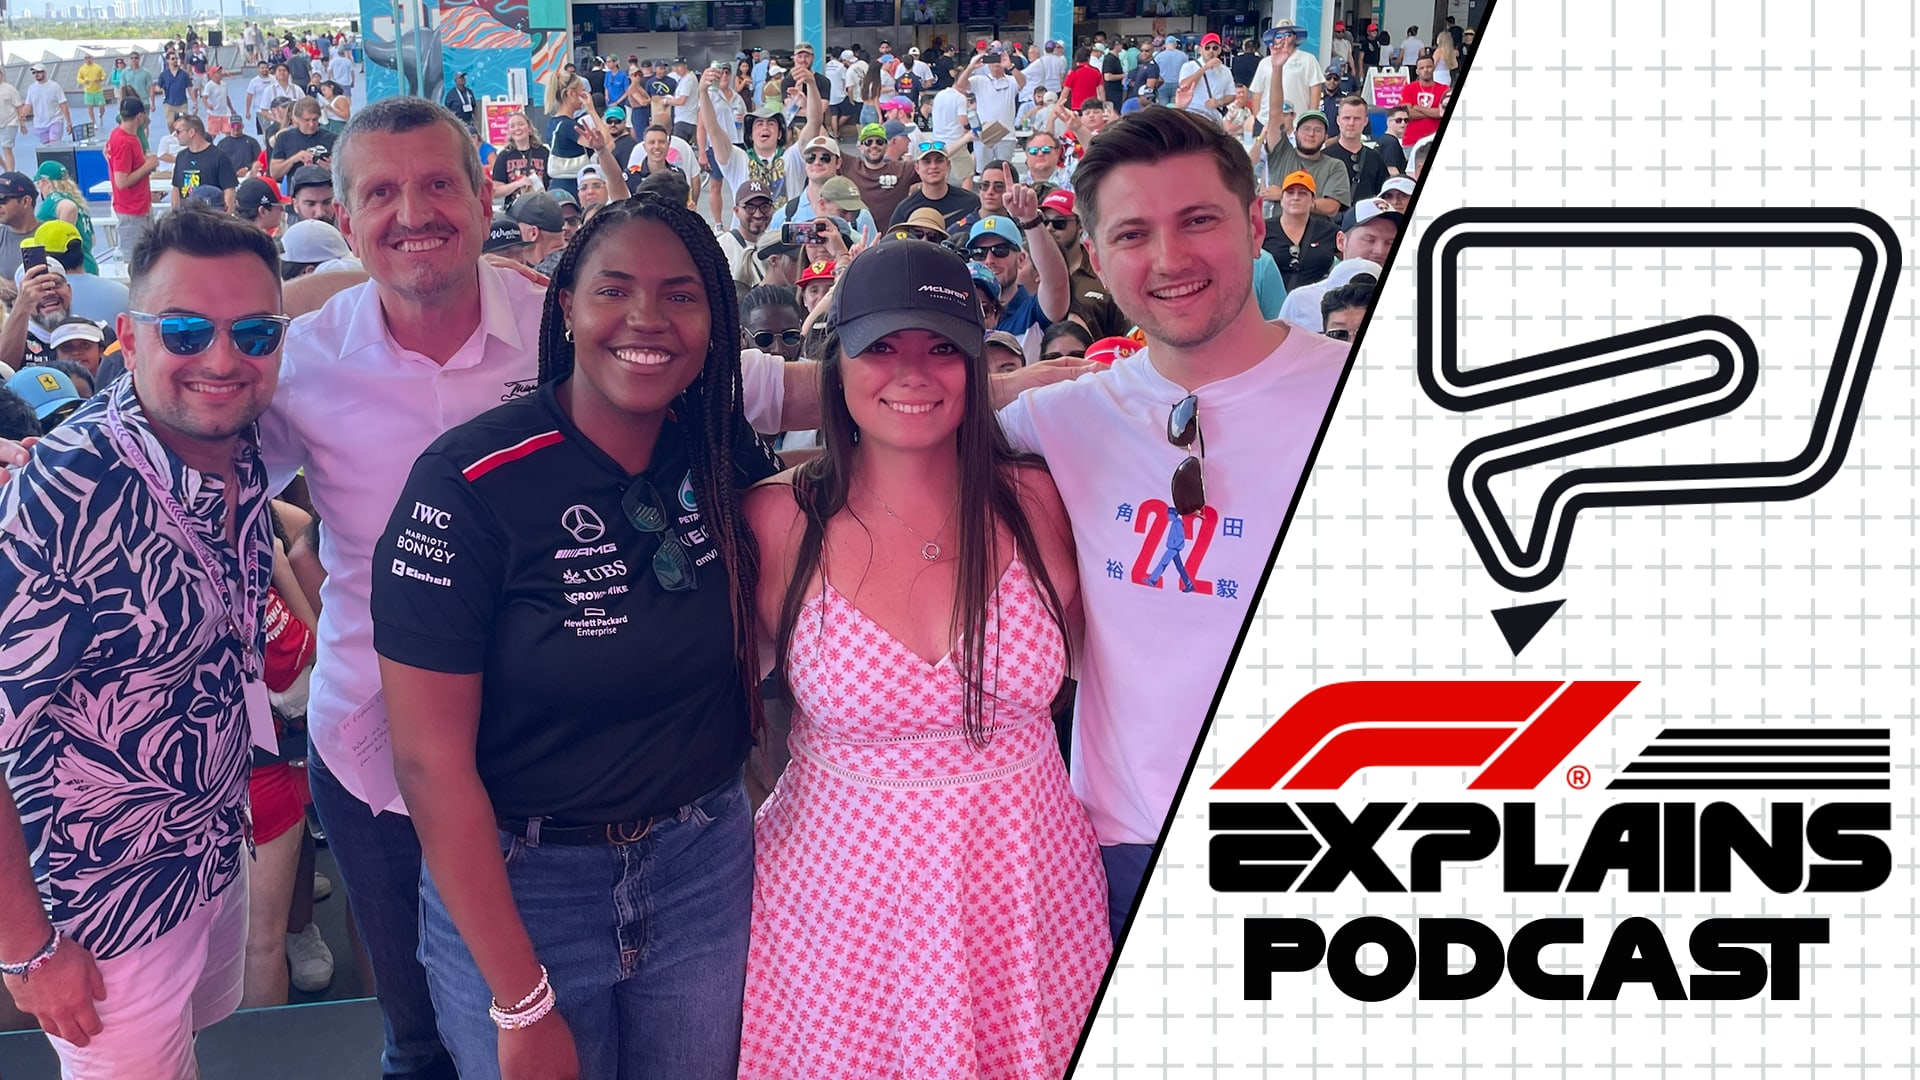 F1 EXPLAINS: Live at the Miami Grand Prix with Guenther Steiner